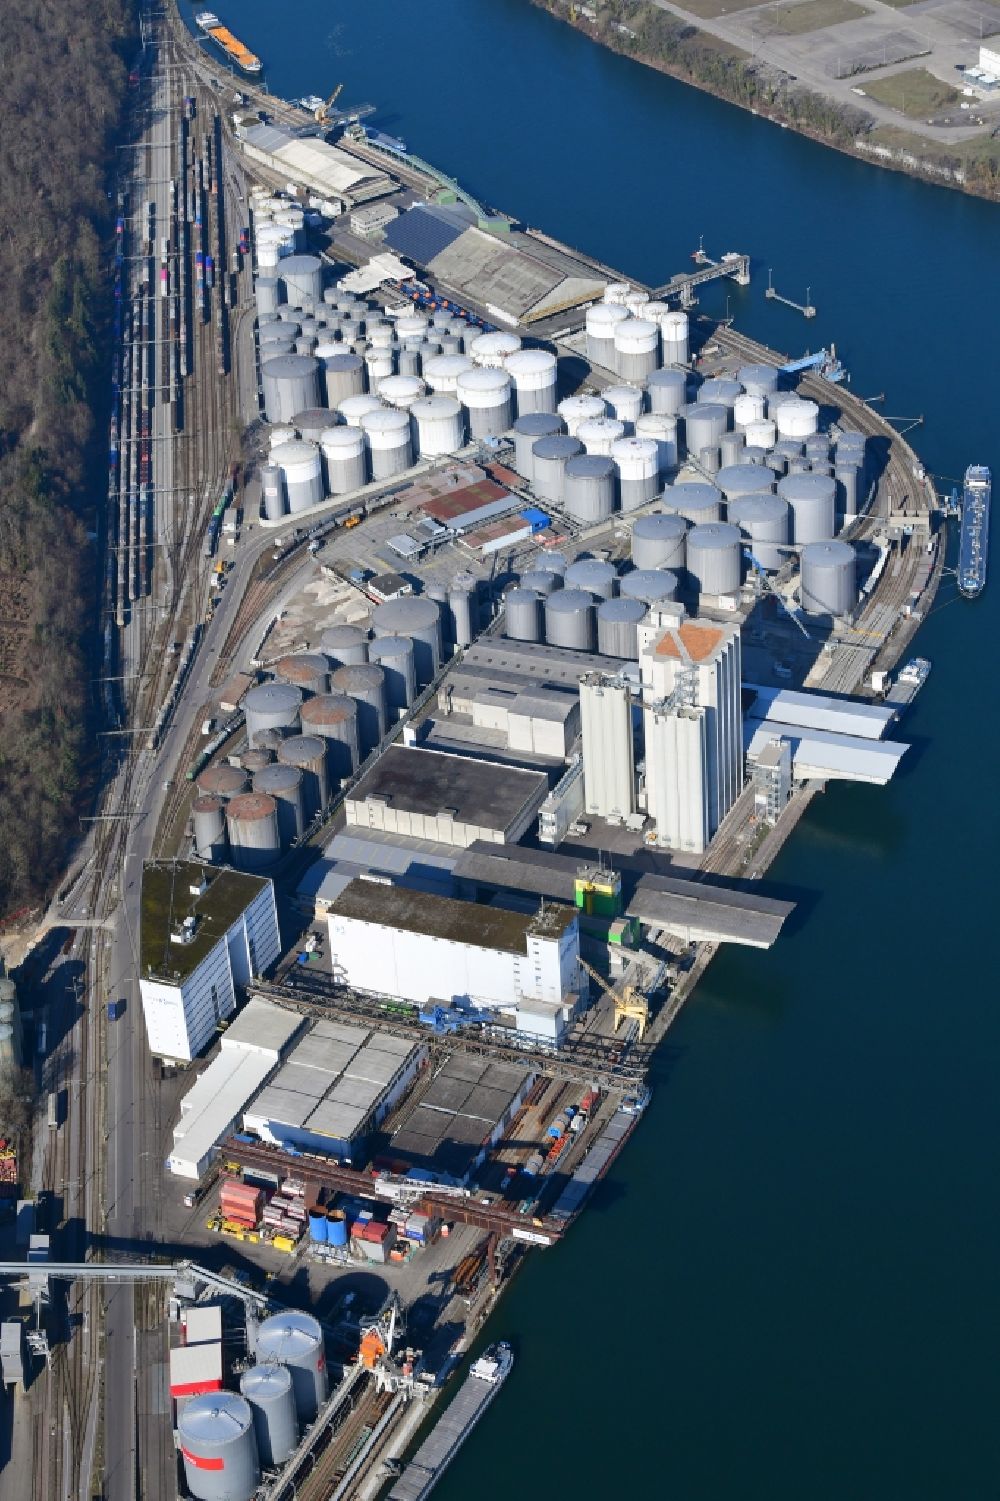 Aerial photograph Muttenz - The tank farm in the Auhafen in Muttenz, Switzerland. The Rhine harbor is turnover for industry and petroleum products